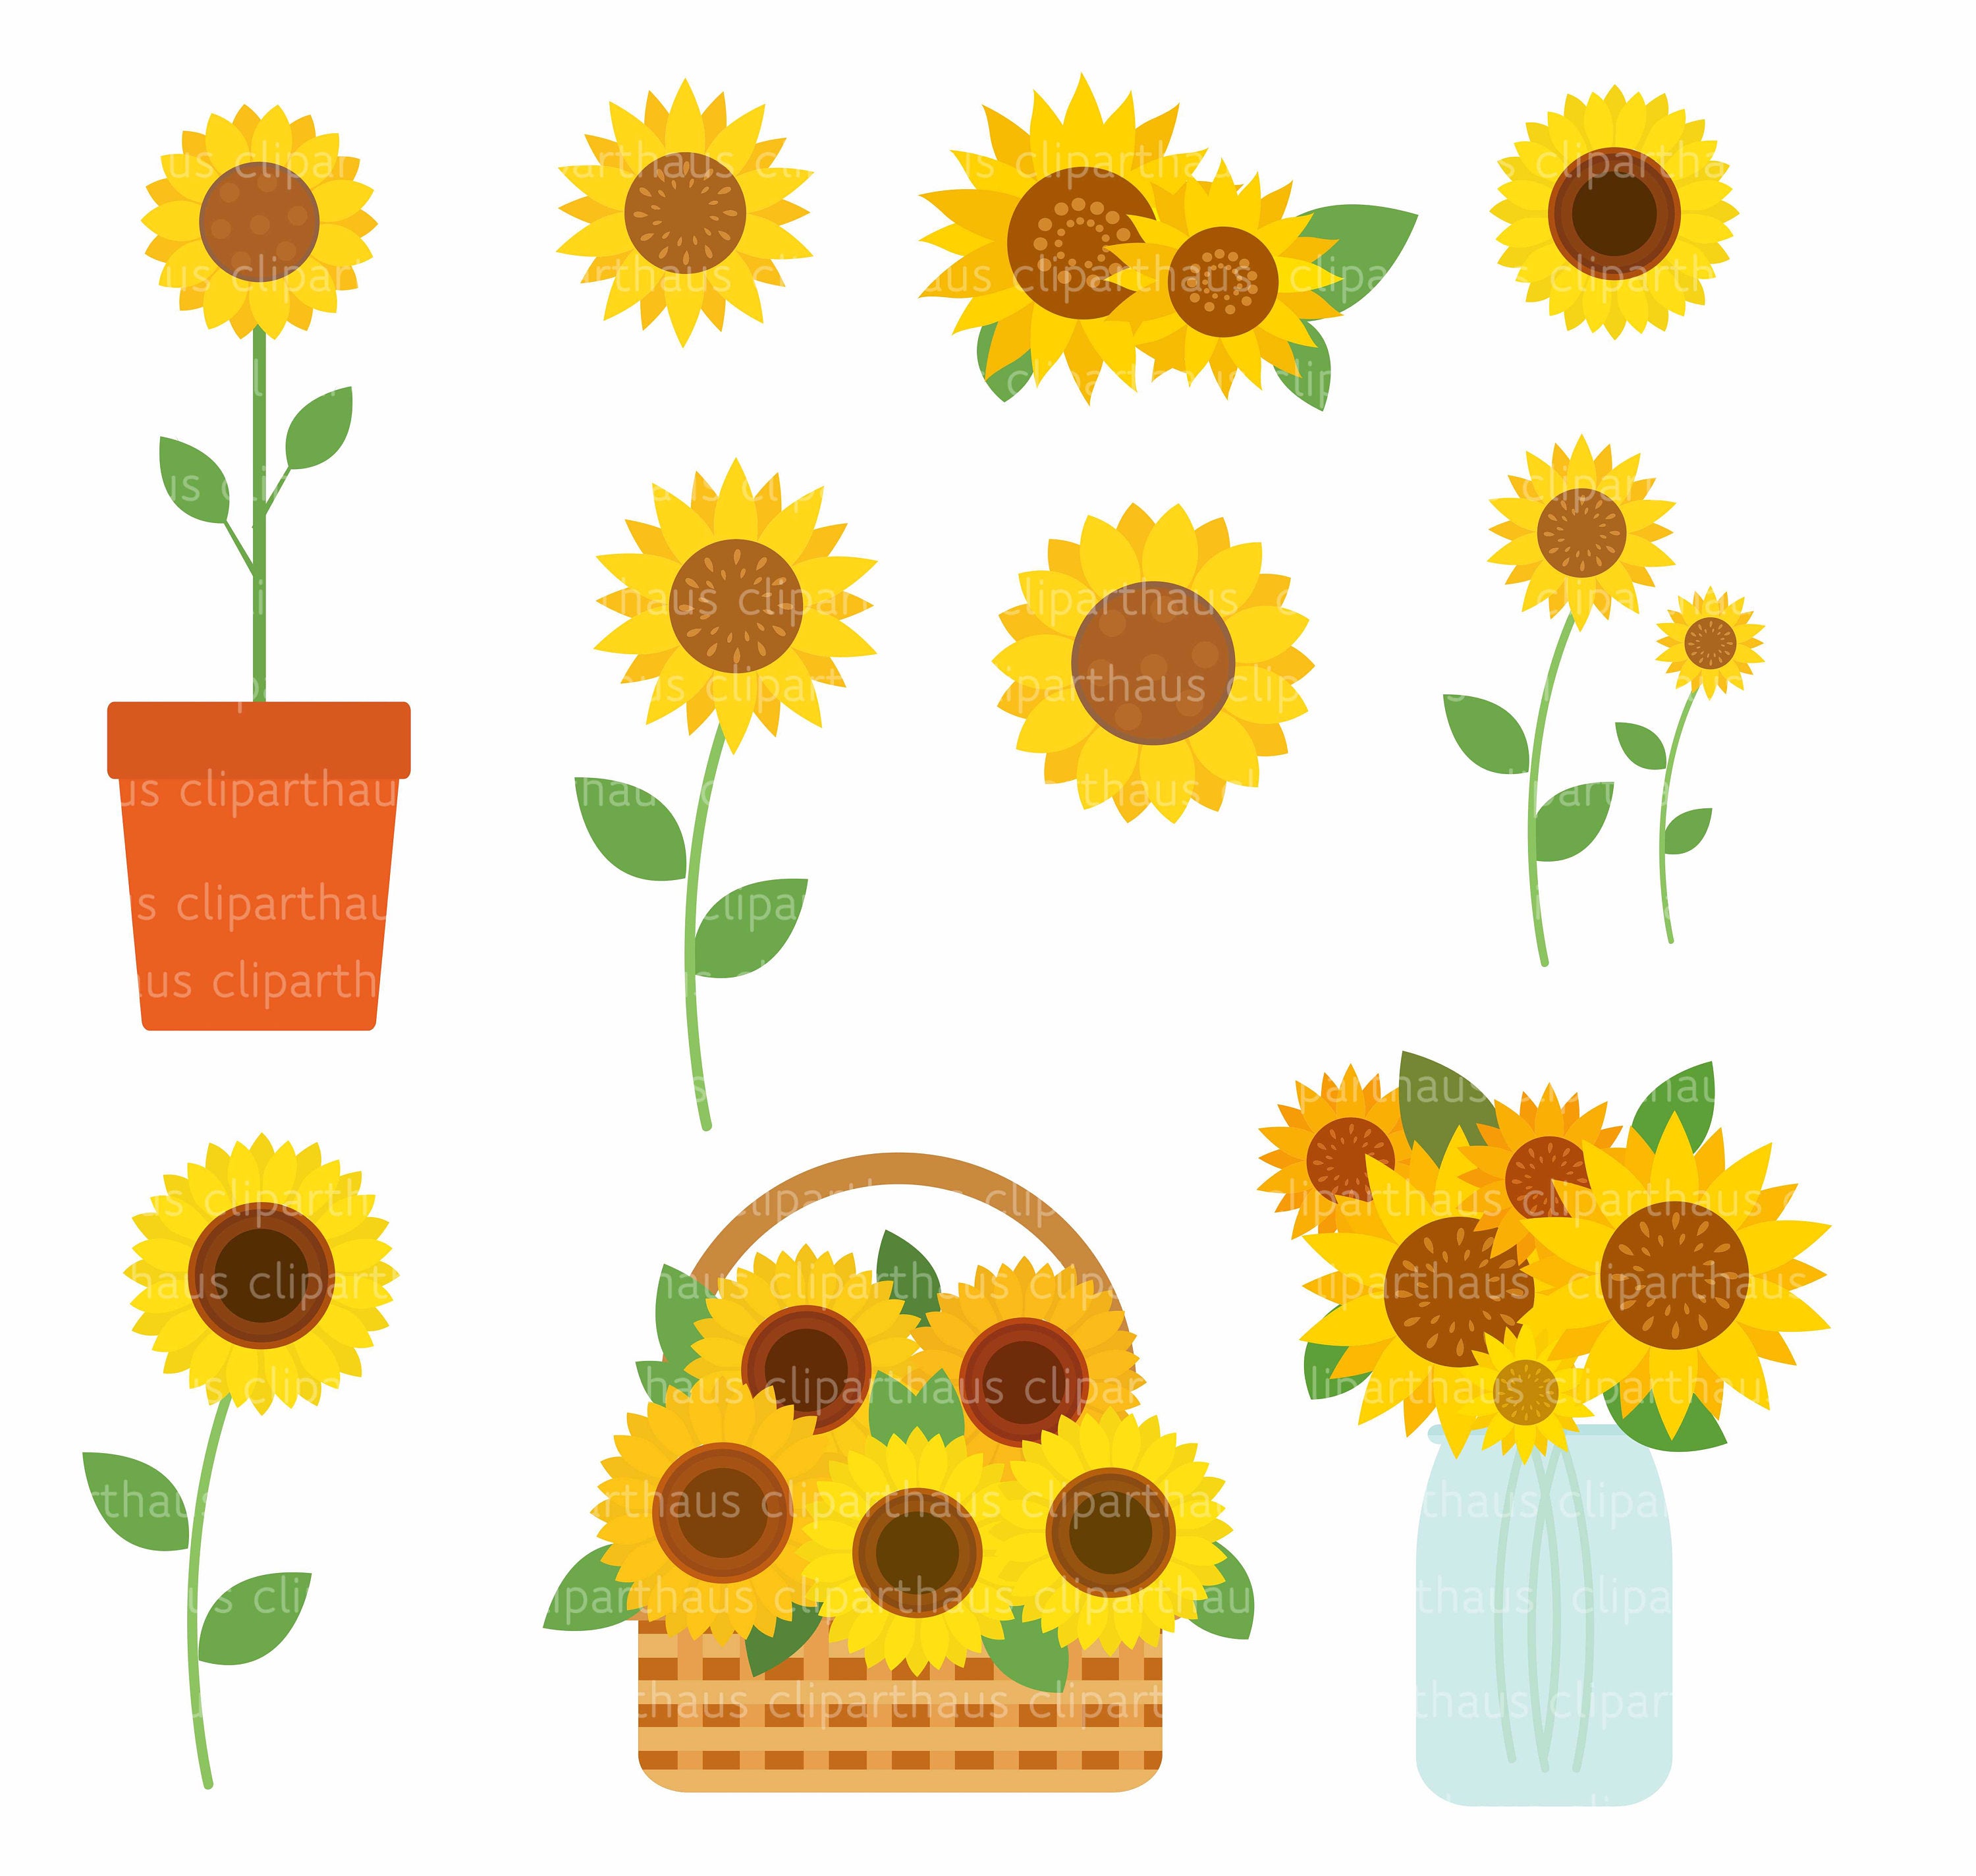 Download clipart sunflower pictures 20 free Cliparts | Download ...